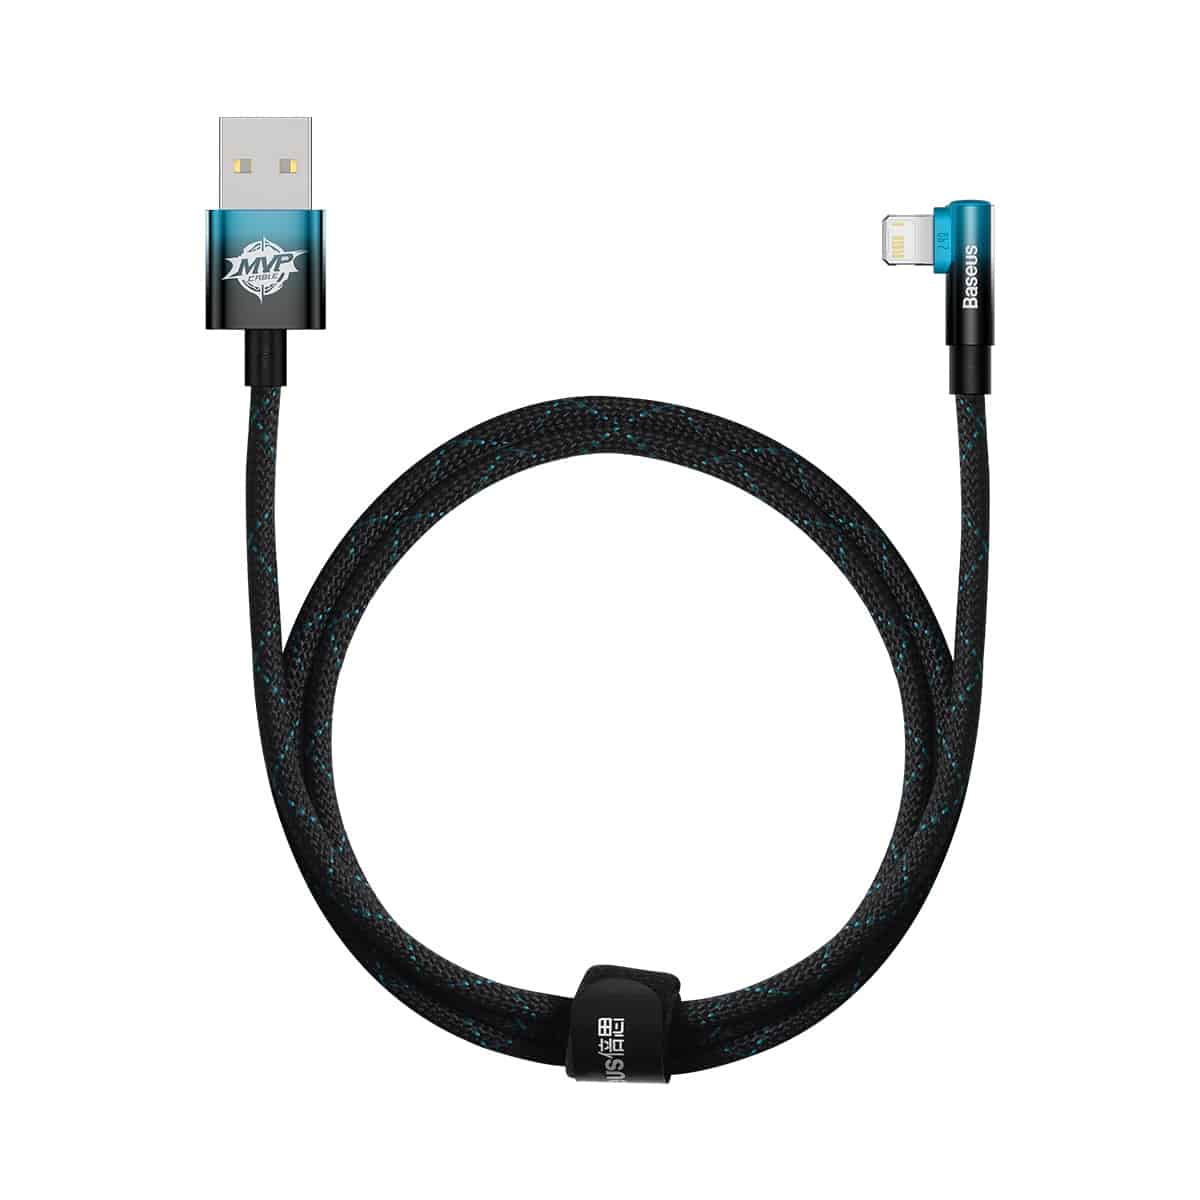 Baseus MVP 2 Elbow-shaped Fast Charging Data Cable USB to iPhone 2.4A